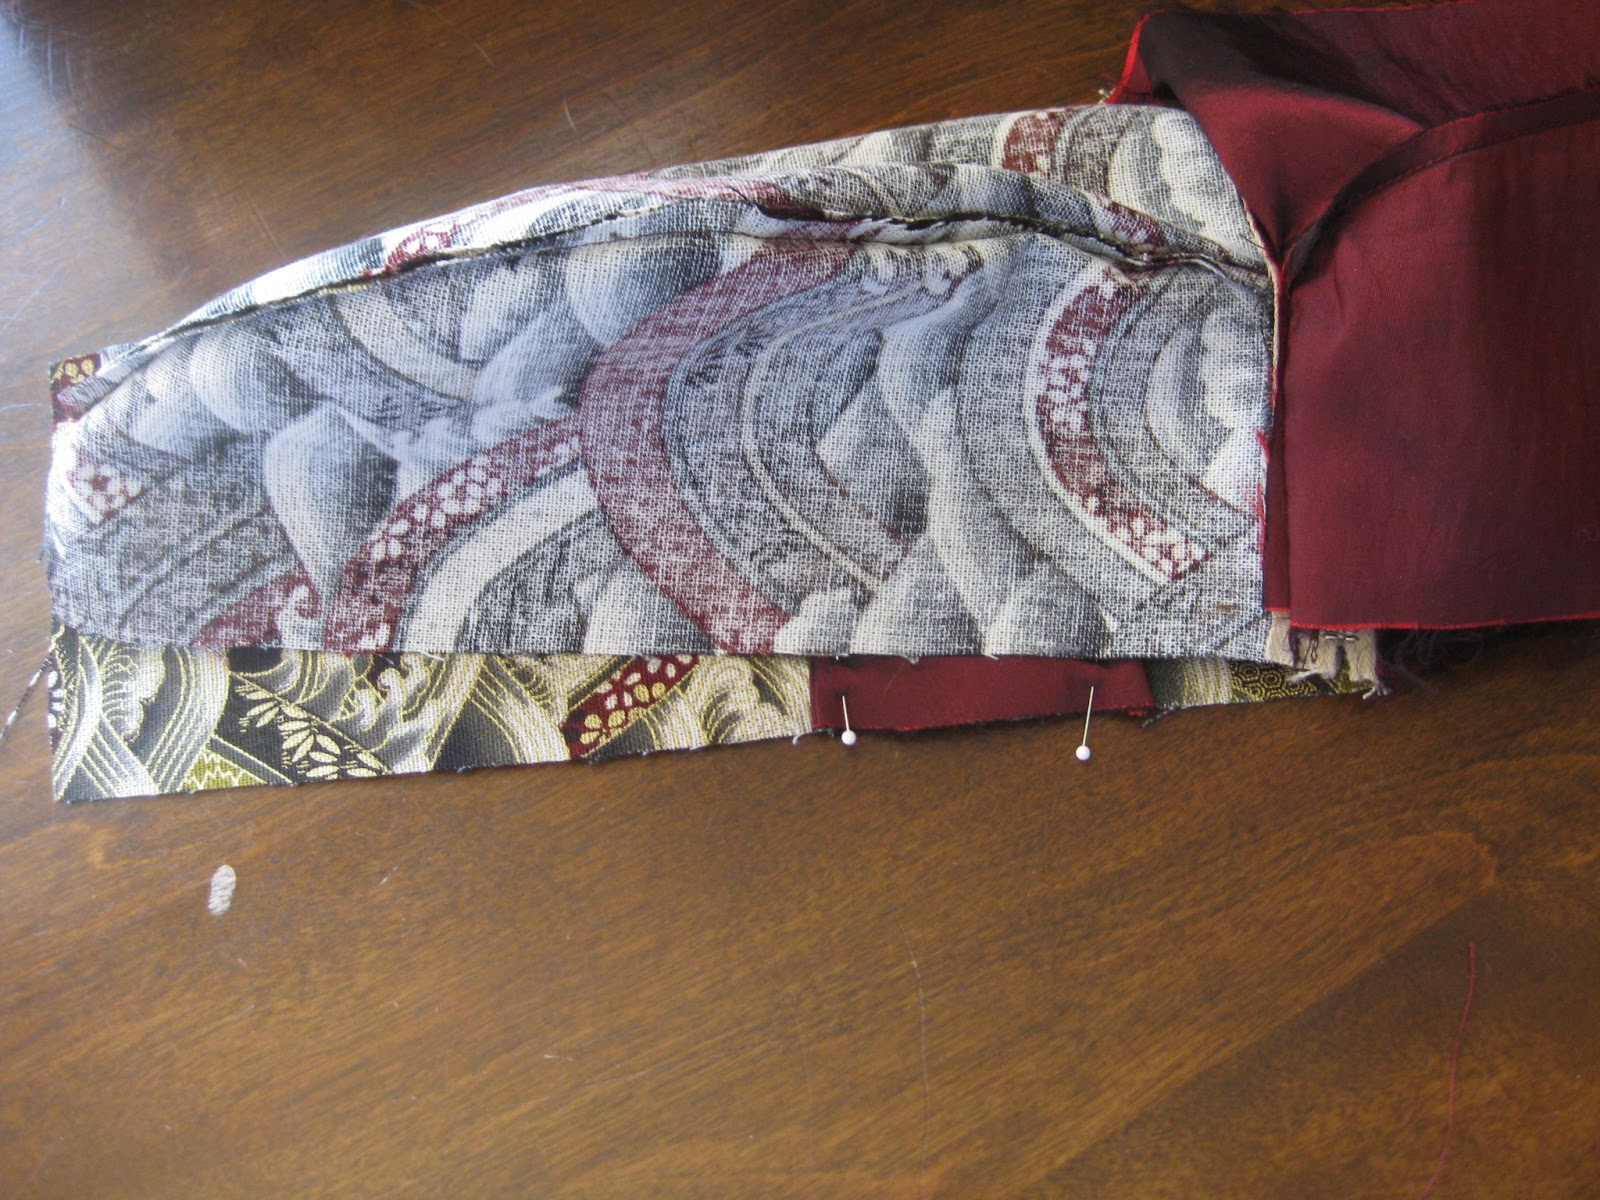 lindapendante dreams: Zip Lipped Fish Pouch With Tutorial